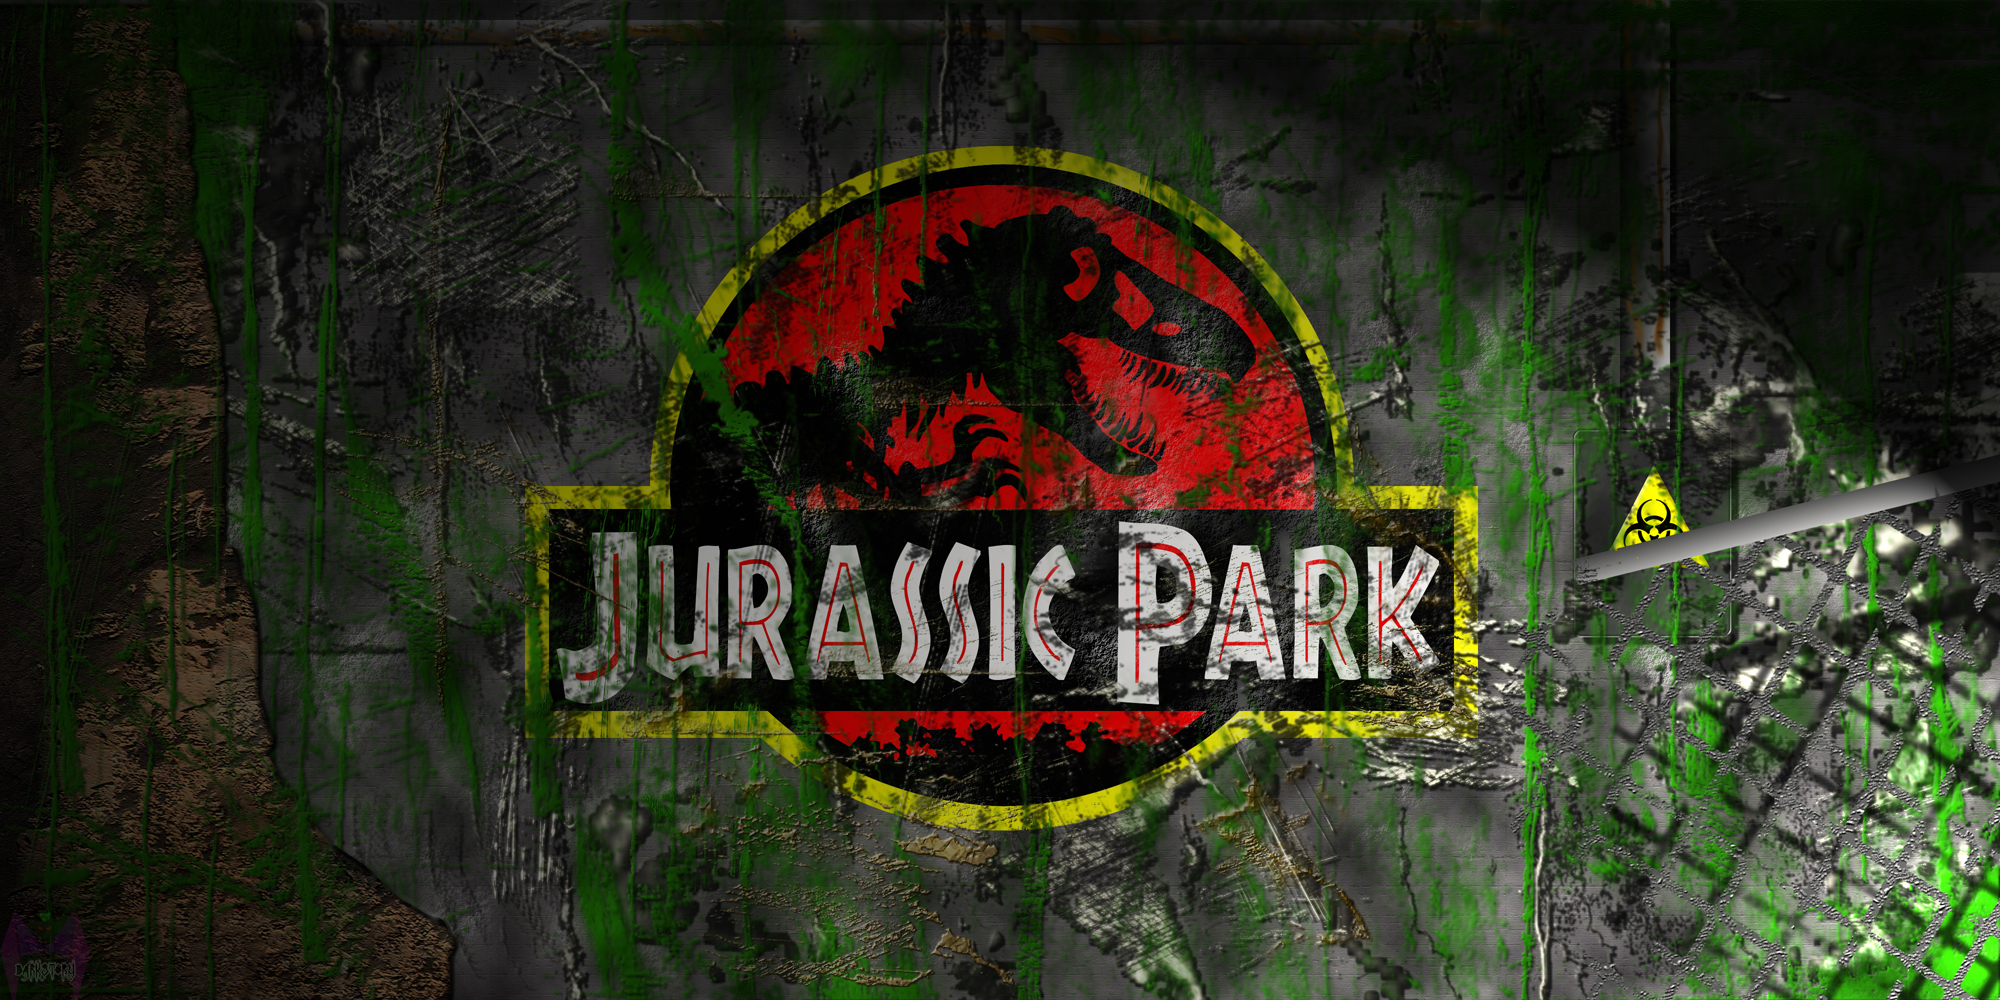 Jurassic Park Wallpaper and Background Image | 2000x1000 | ID:669876